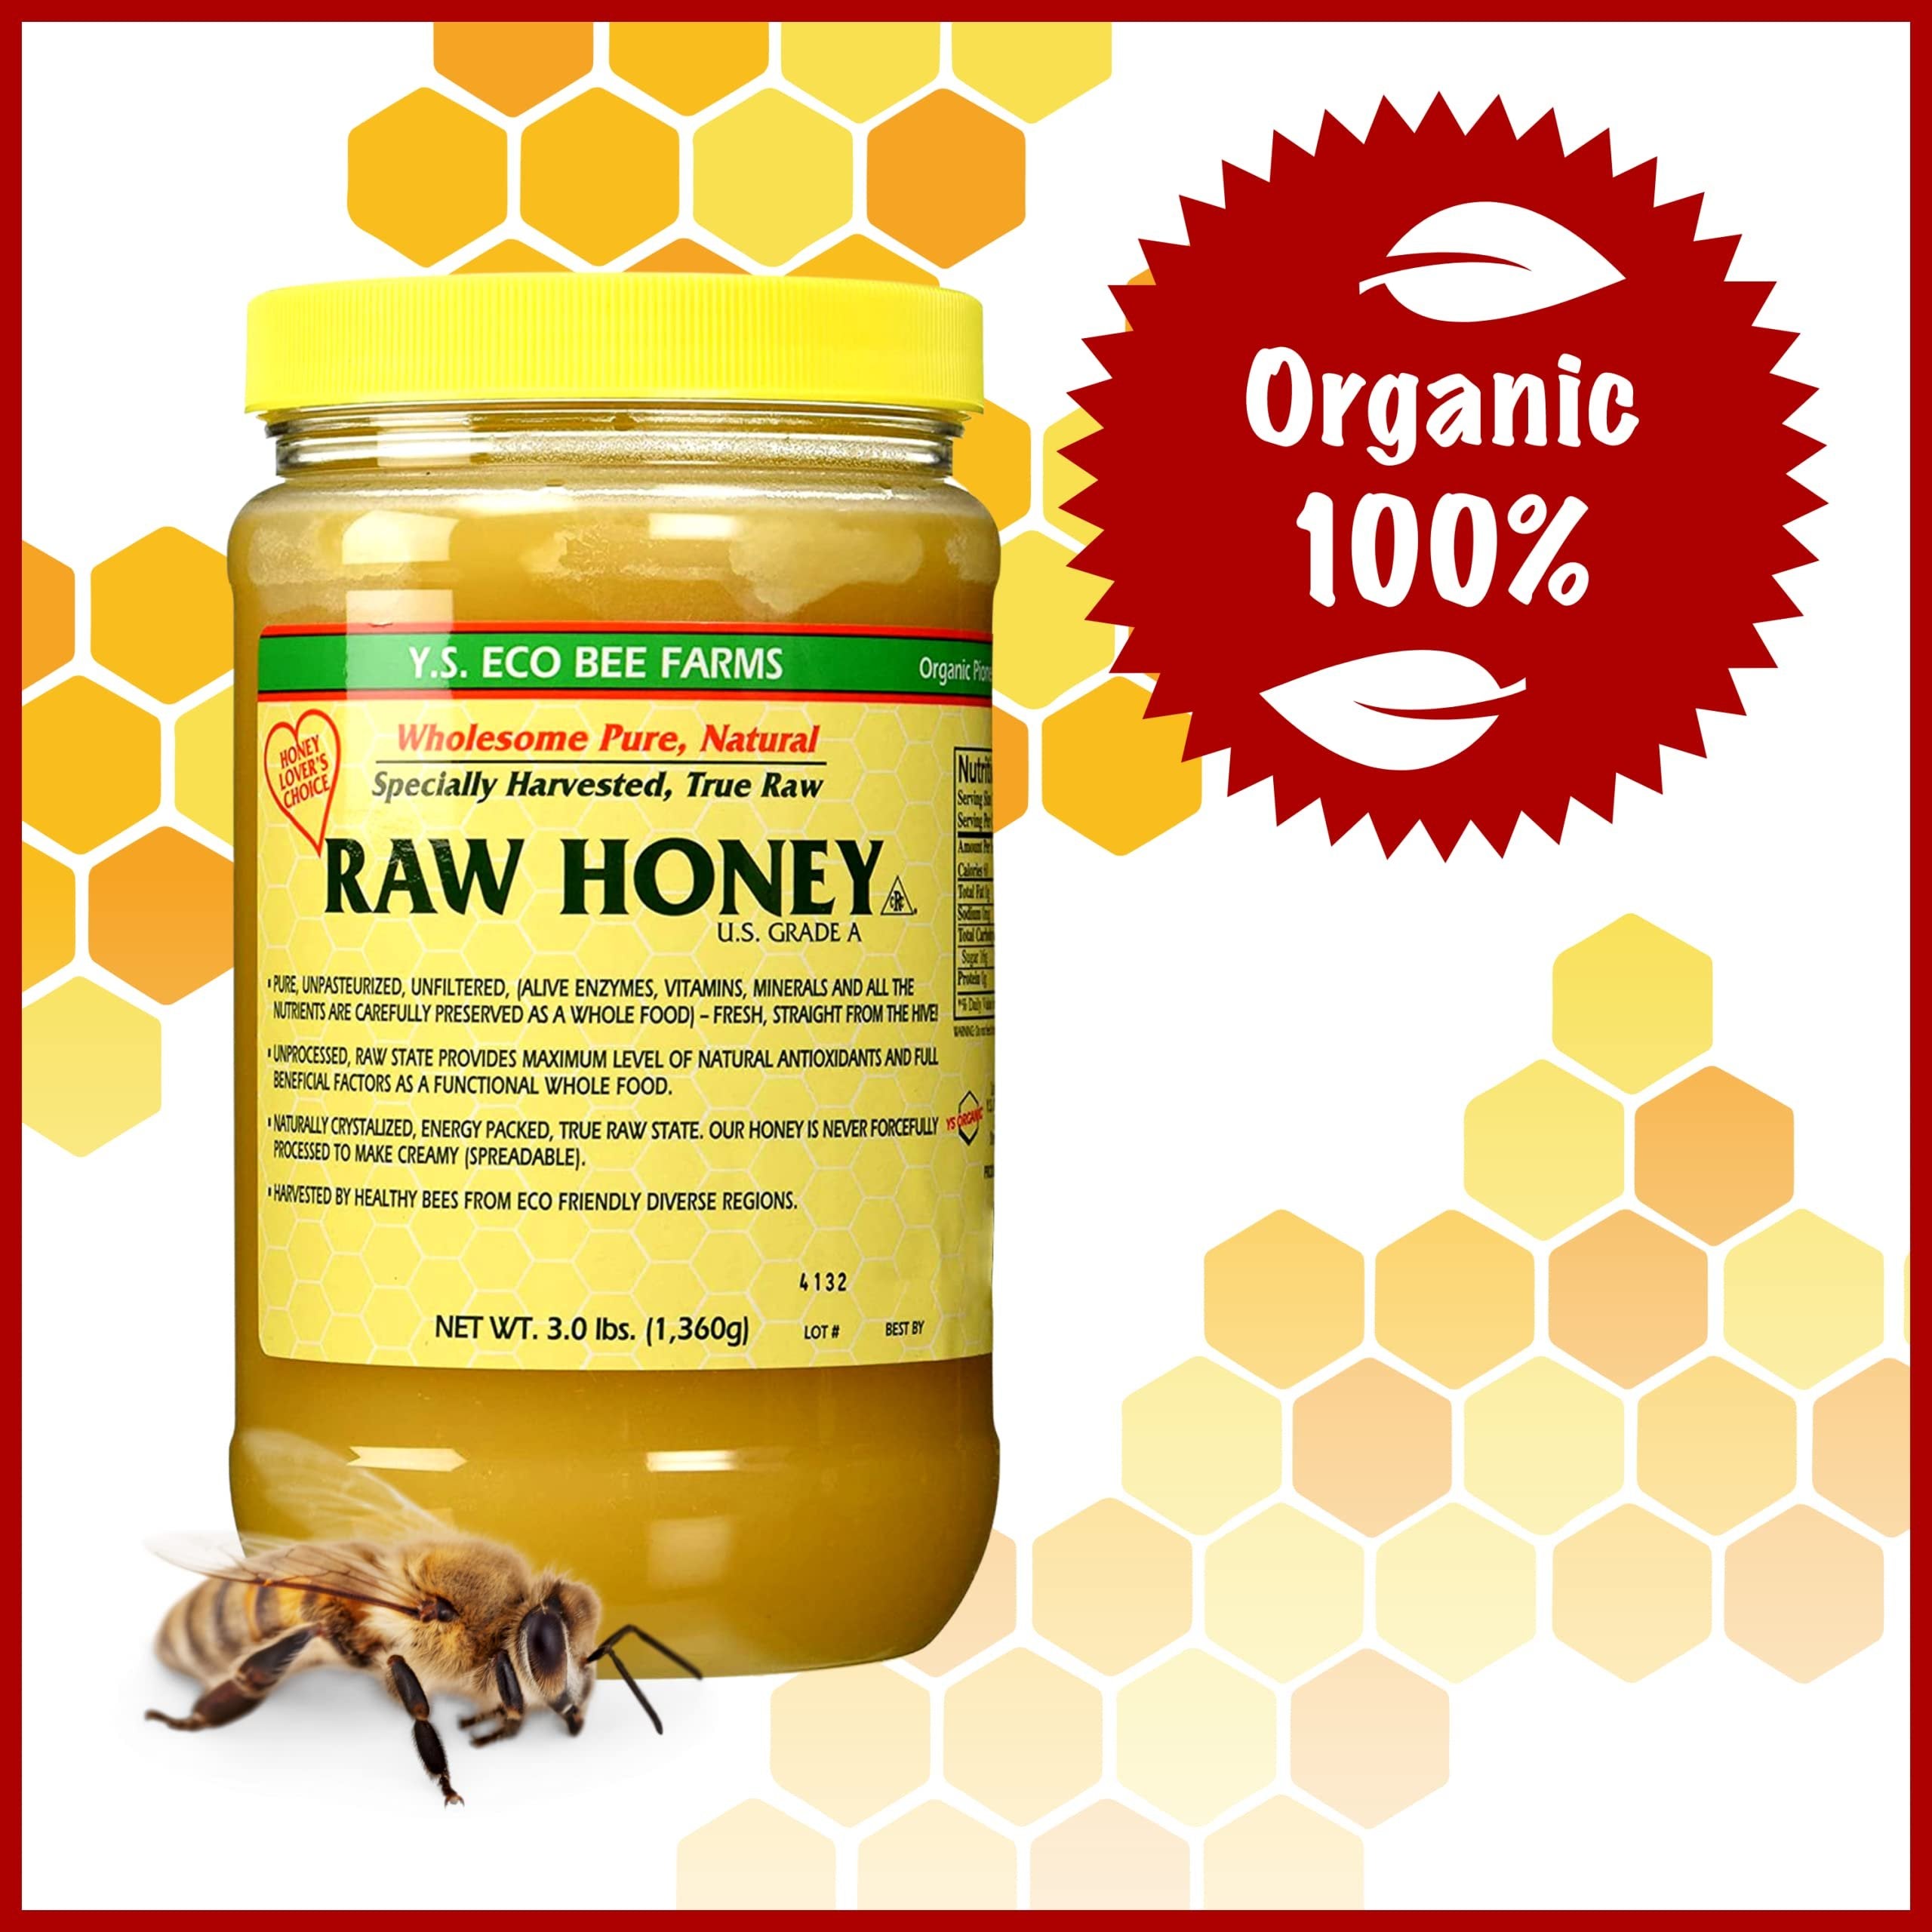 YS Eco Bee Farms RAW HONEY Raw Unfiltered, Unpasteurized  Kosher 3lbs - 3pk